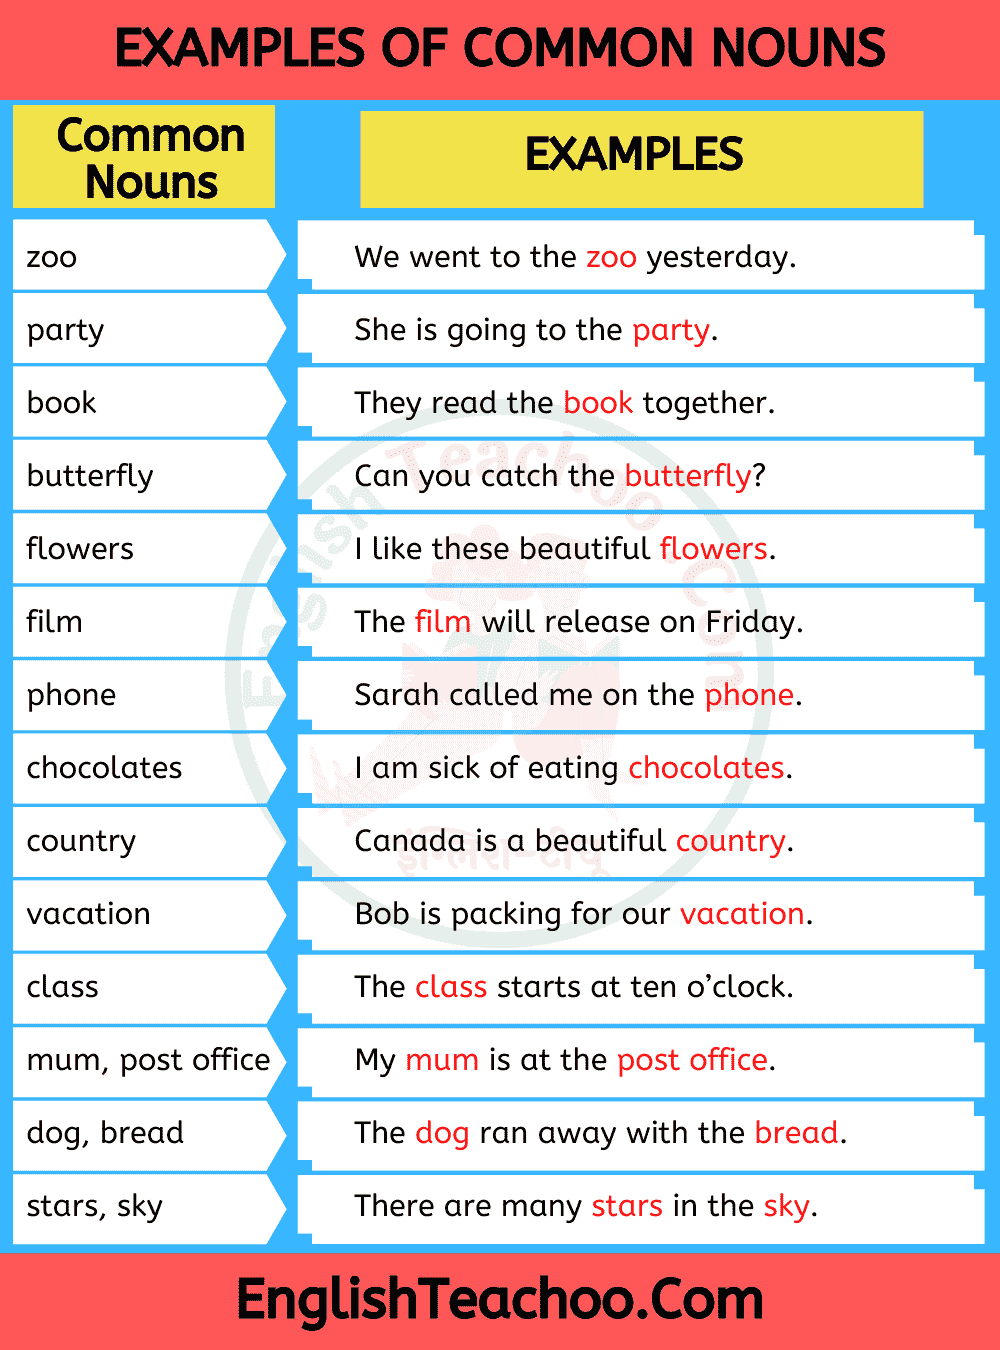 What Are The 20 Examples Of Common Nouns In A Sentence